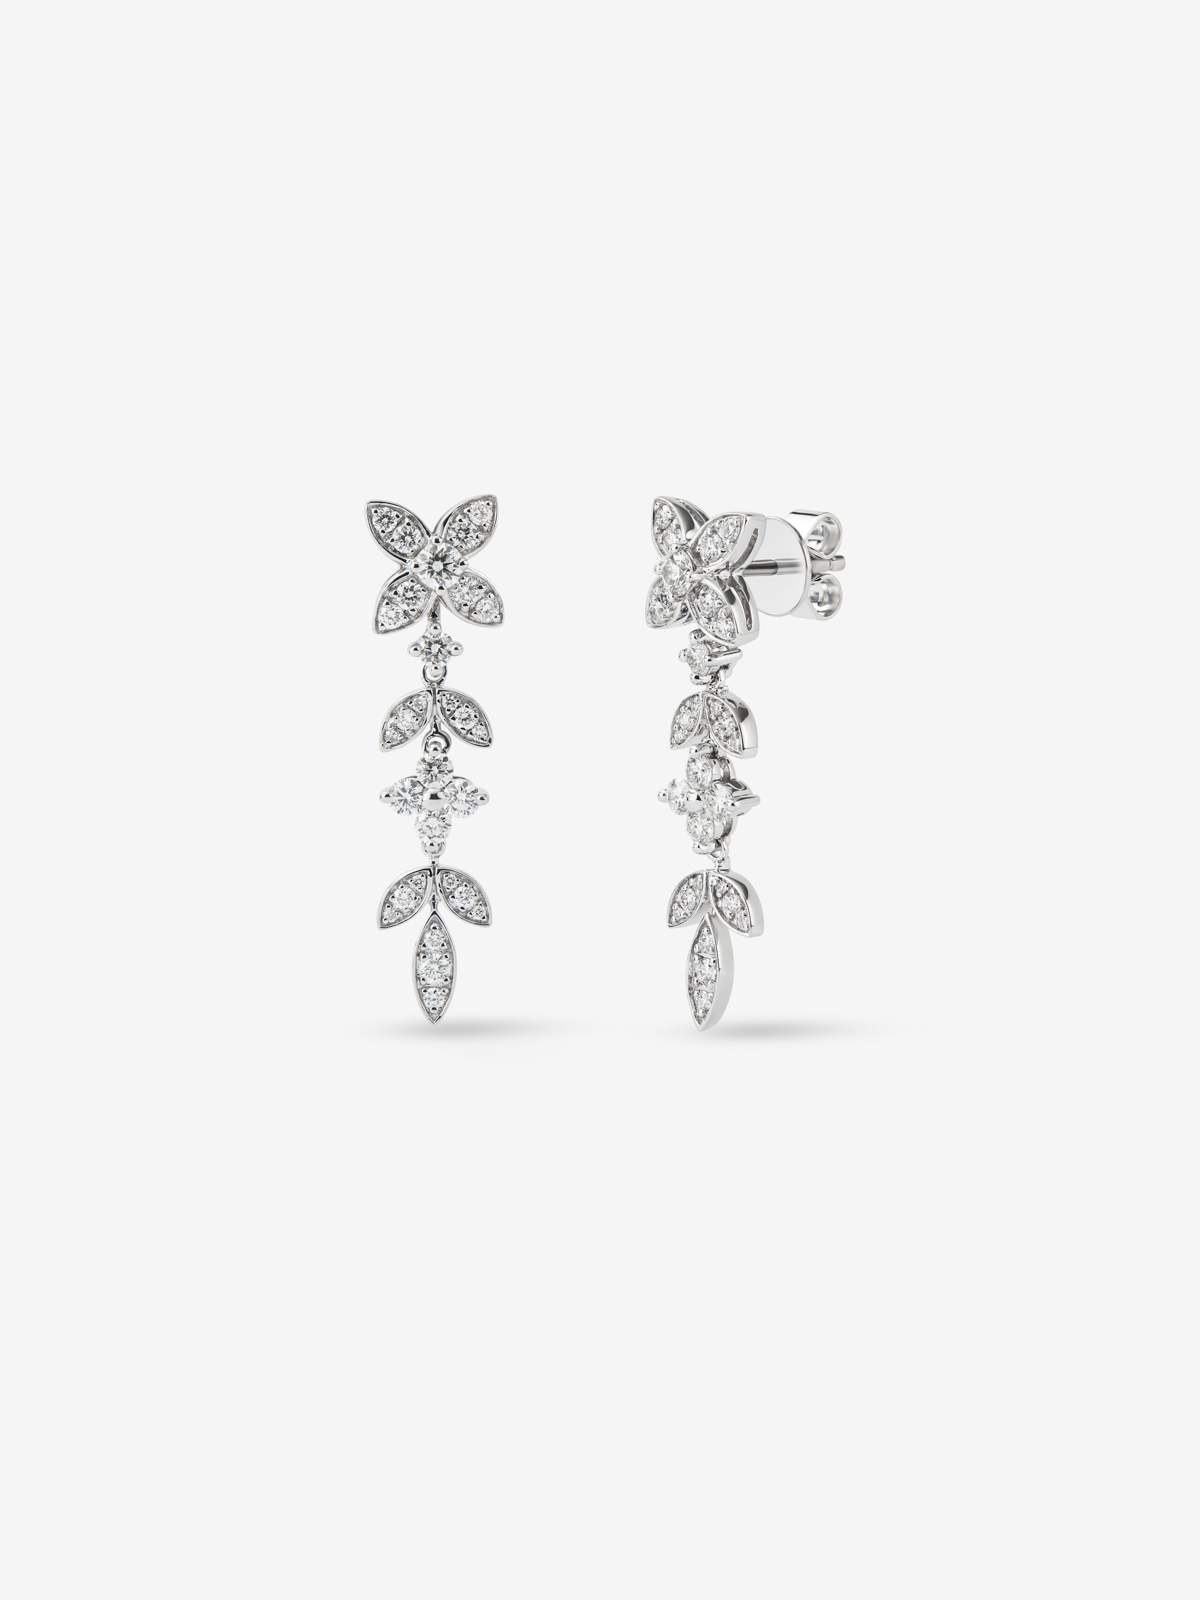 18K white gold earrings with 1.07 ct brilliant cut diamonds